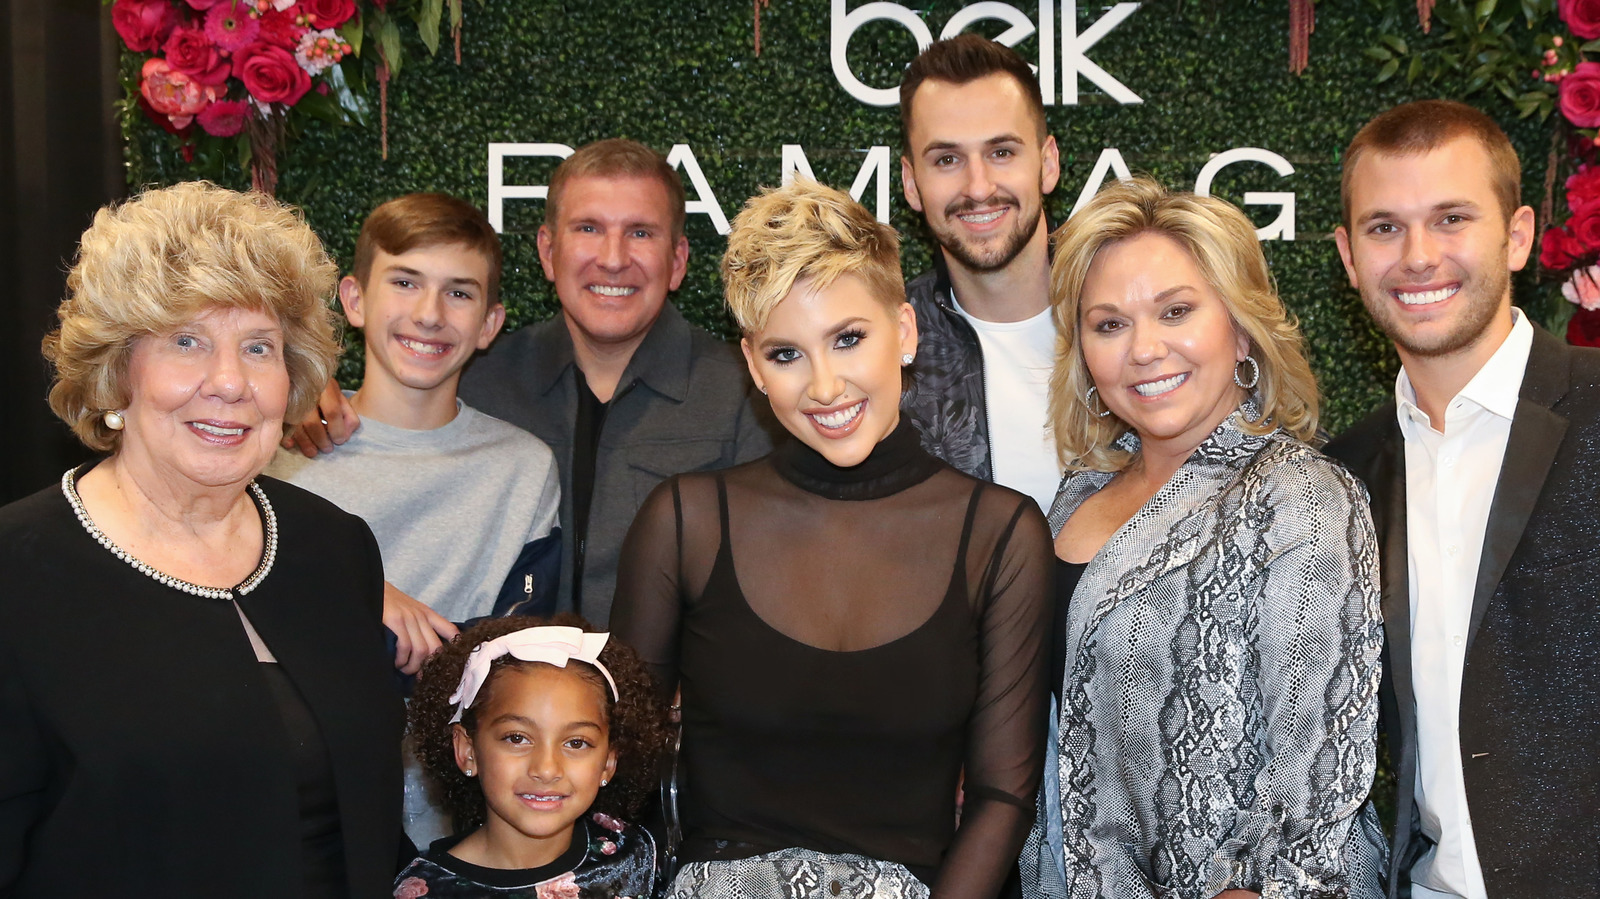 The Most Awkward Things We've Witnessed On Chrisley Knows Best